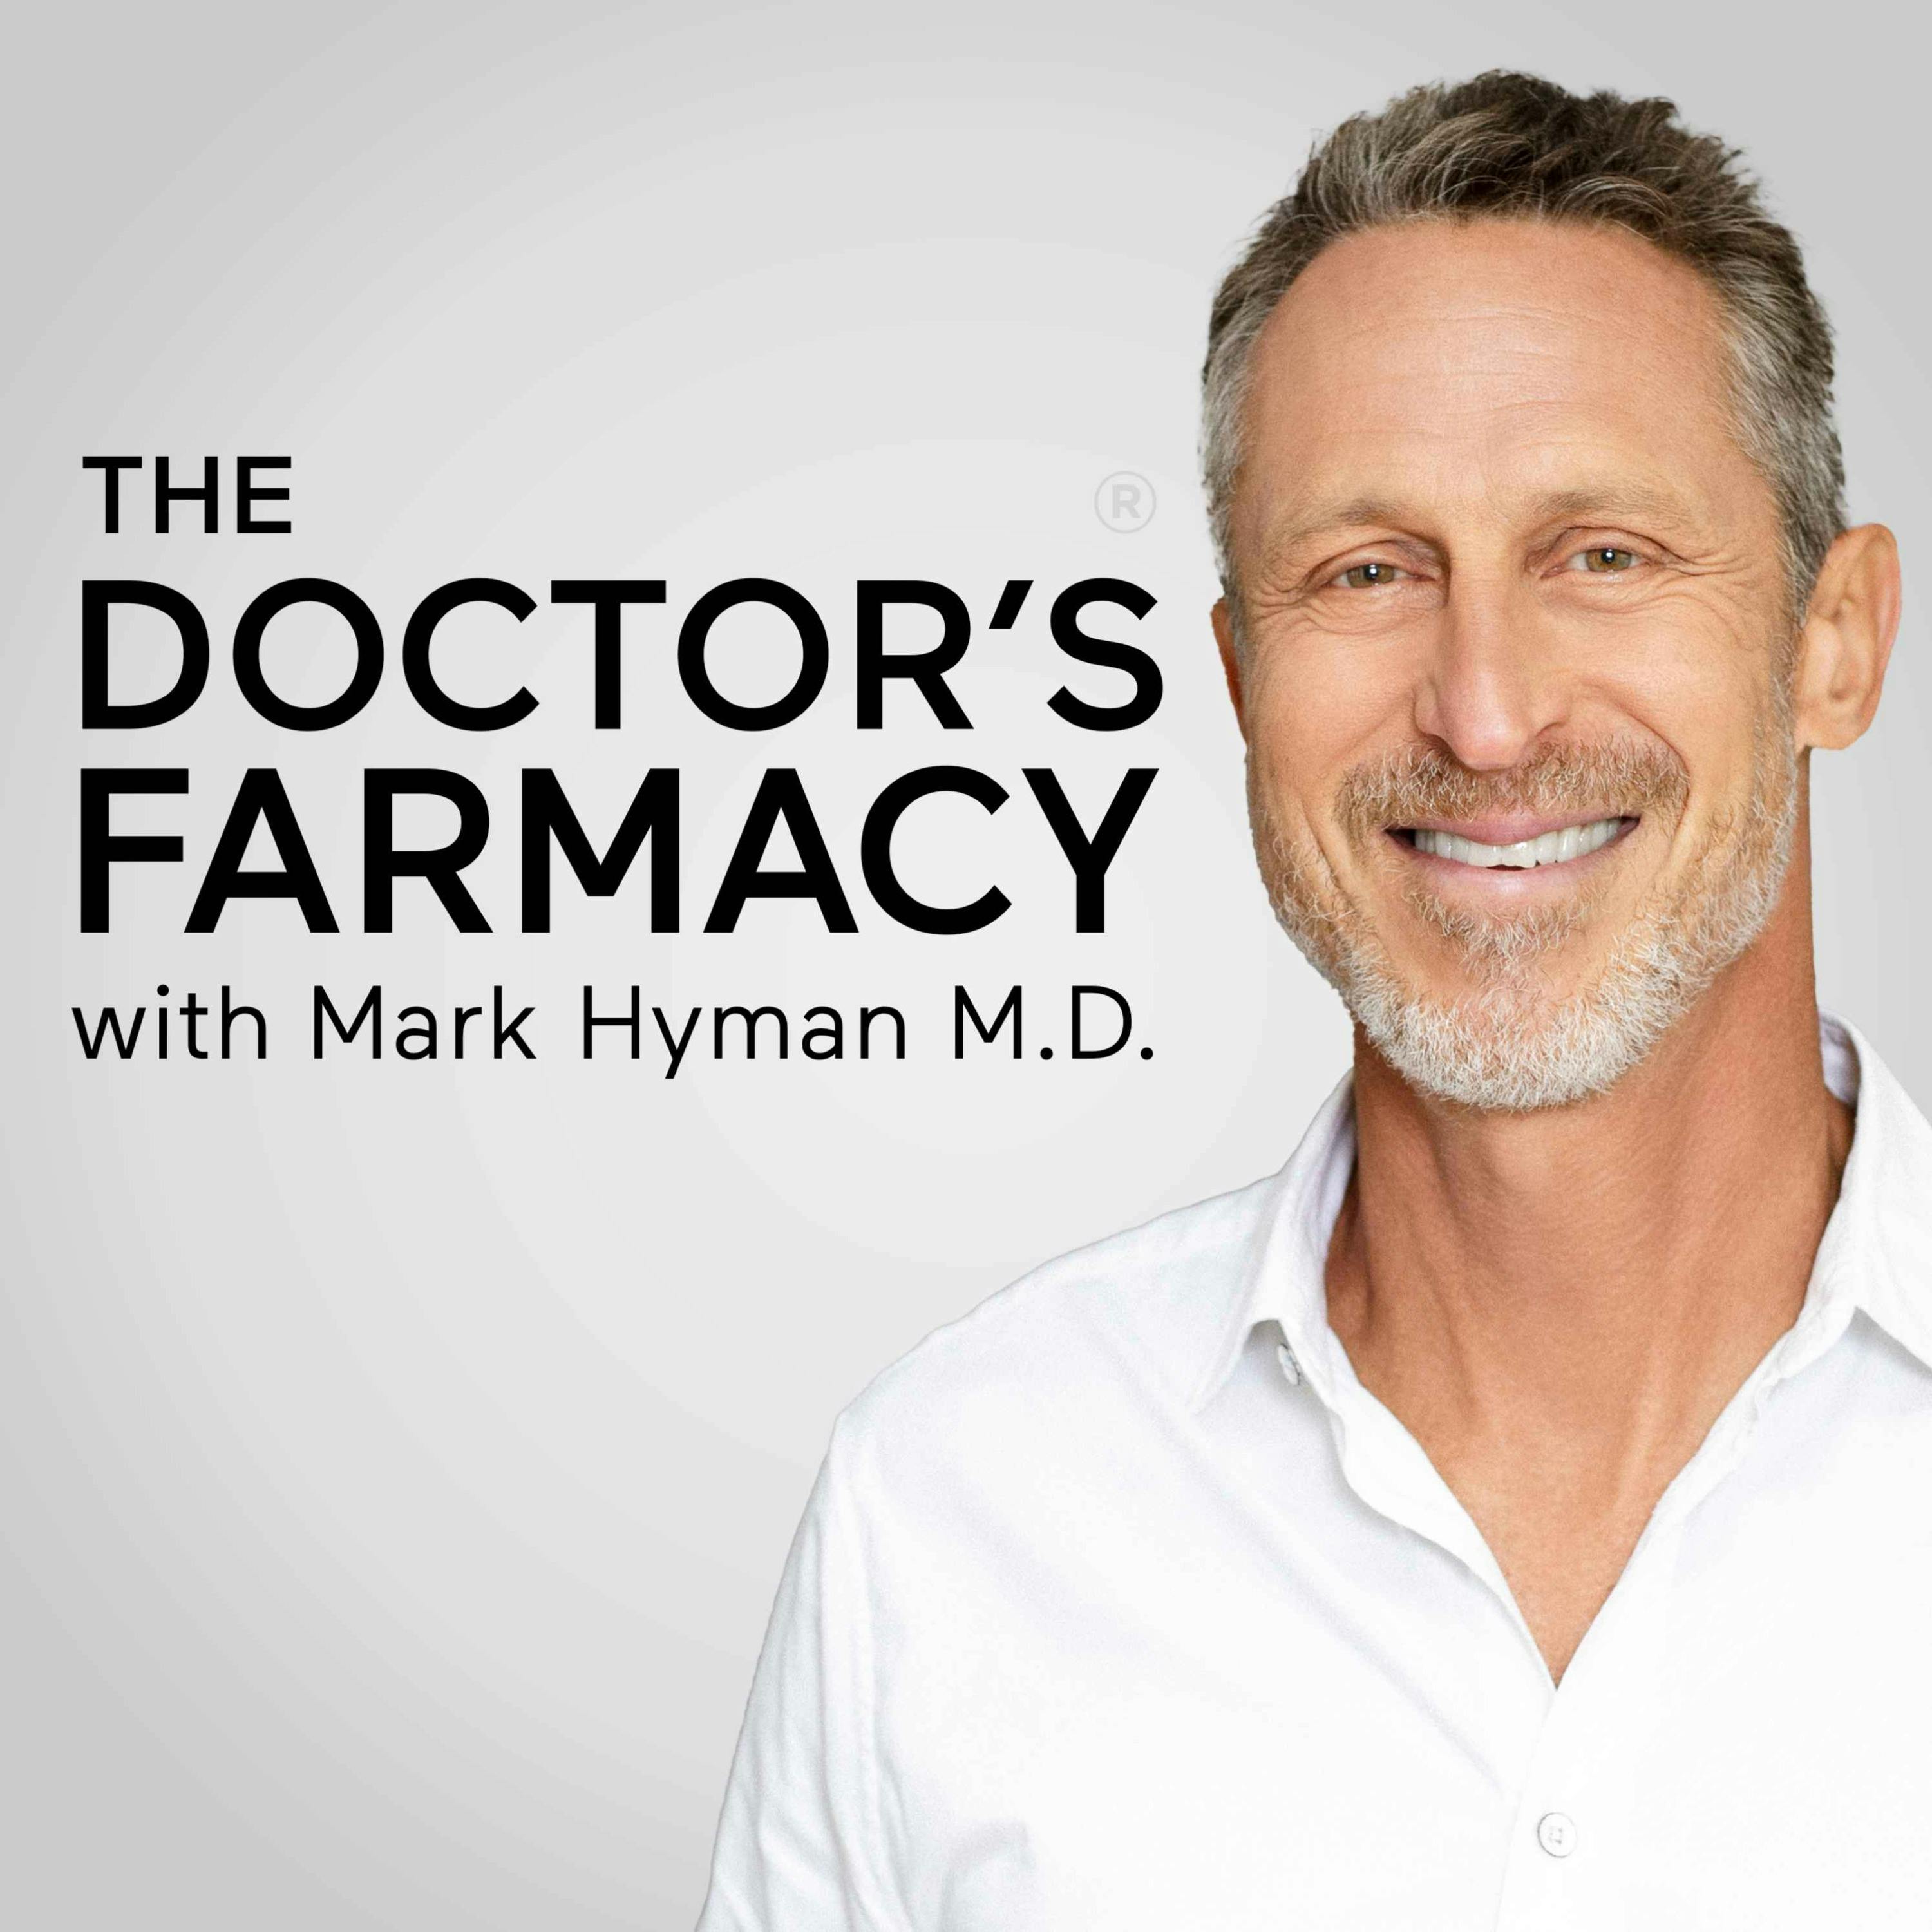 Exclusive Dr. Hyman+ Ask Mark A Doctor: Melatonin, Weight Loss, And More